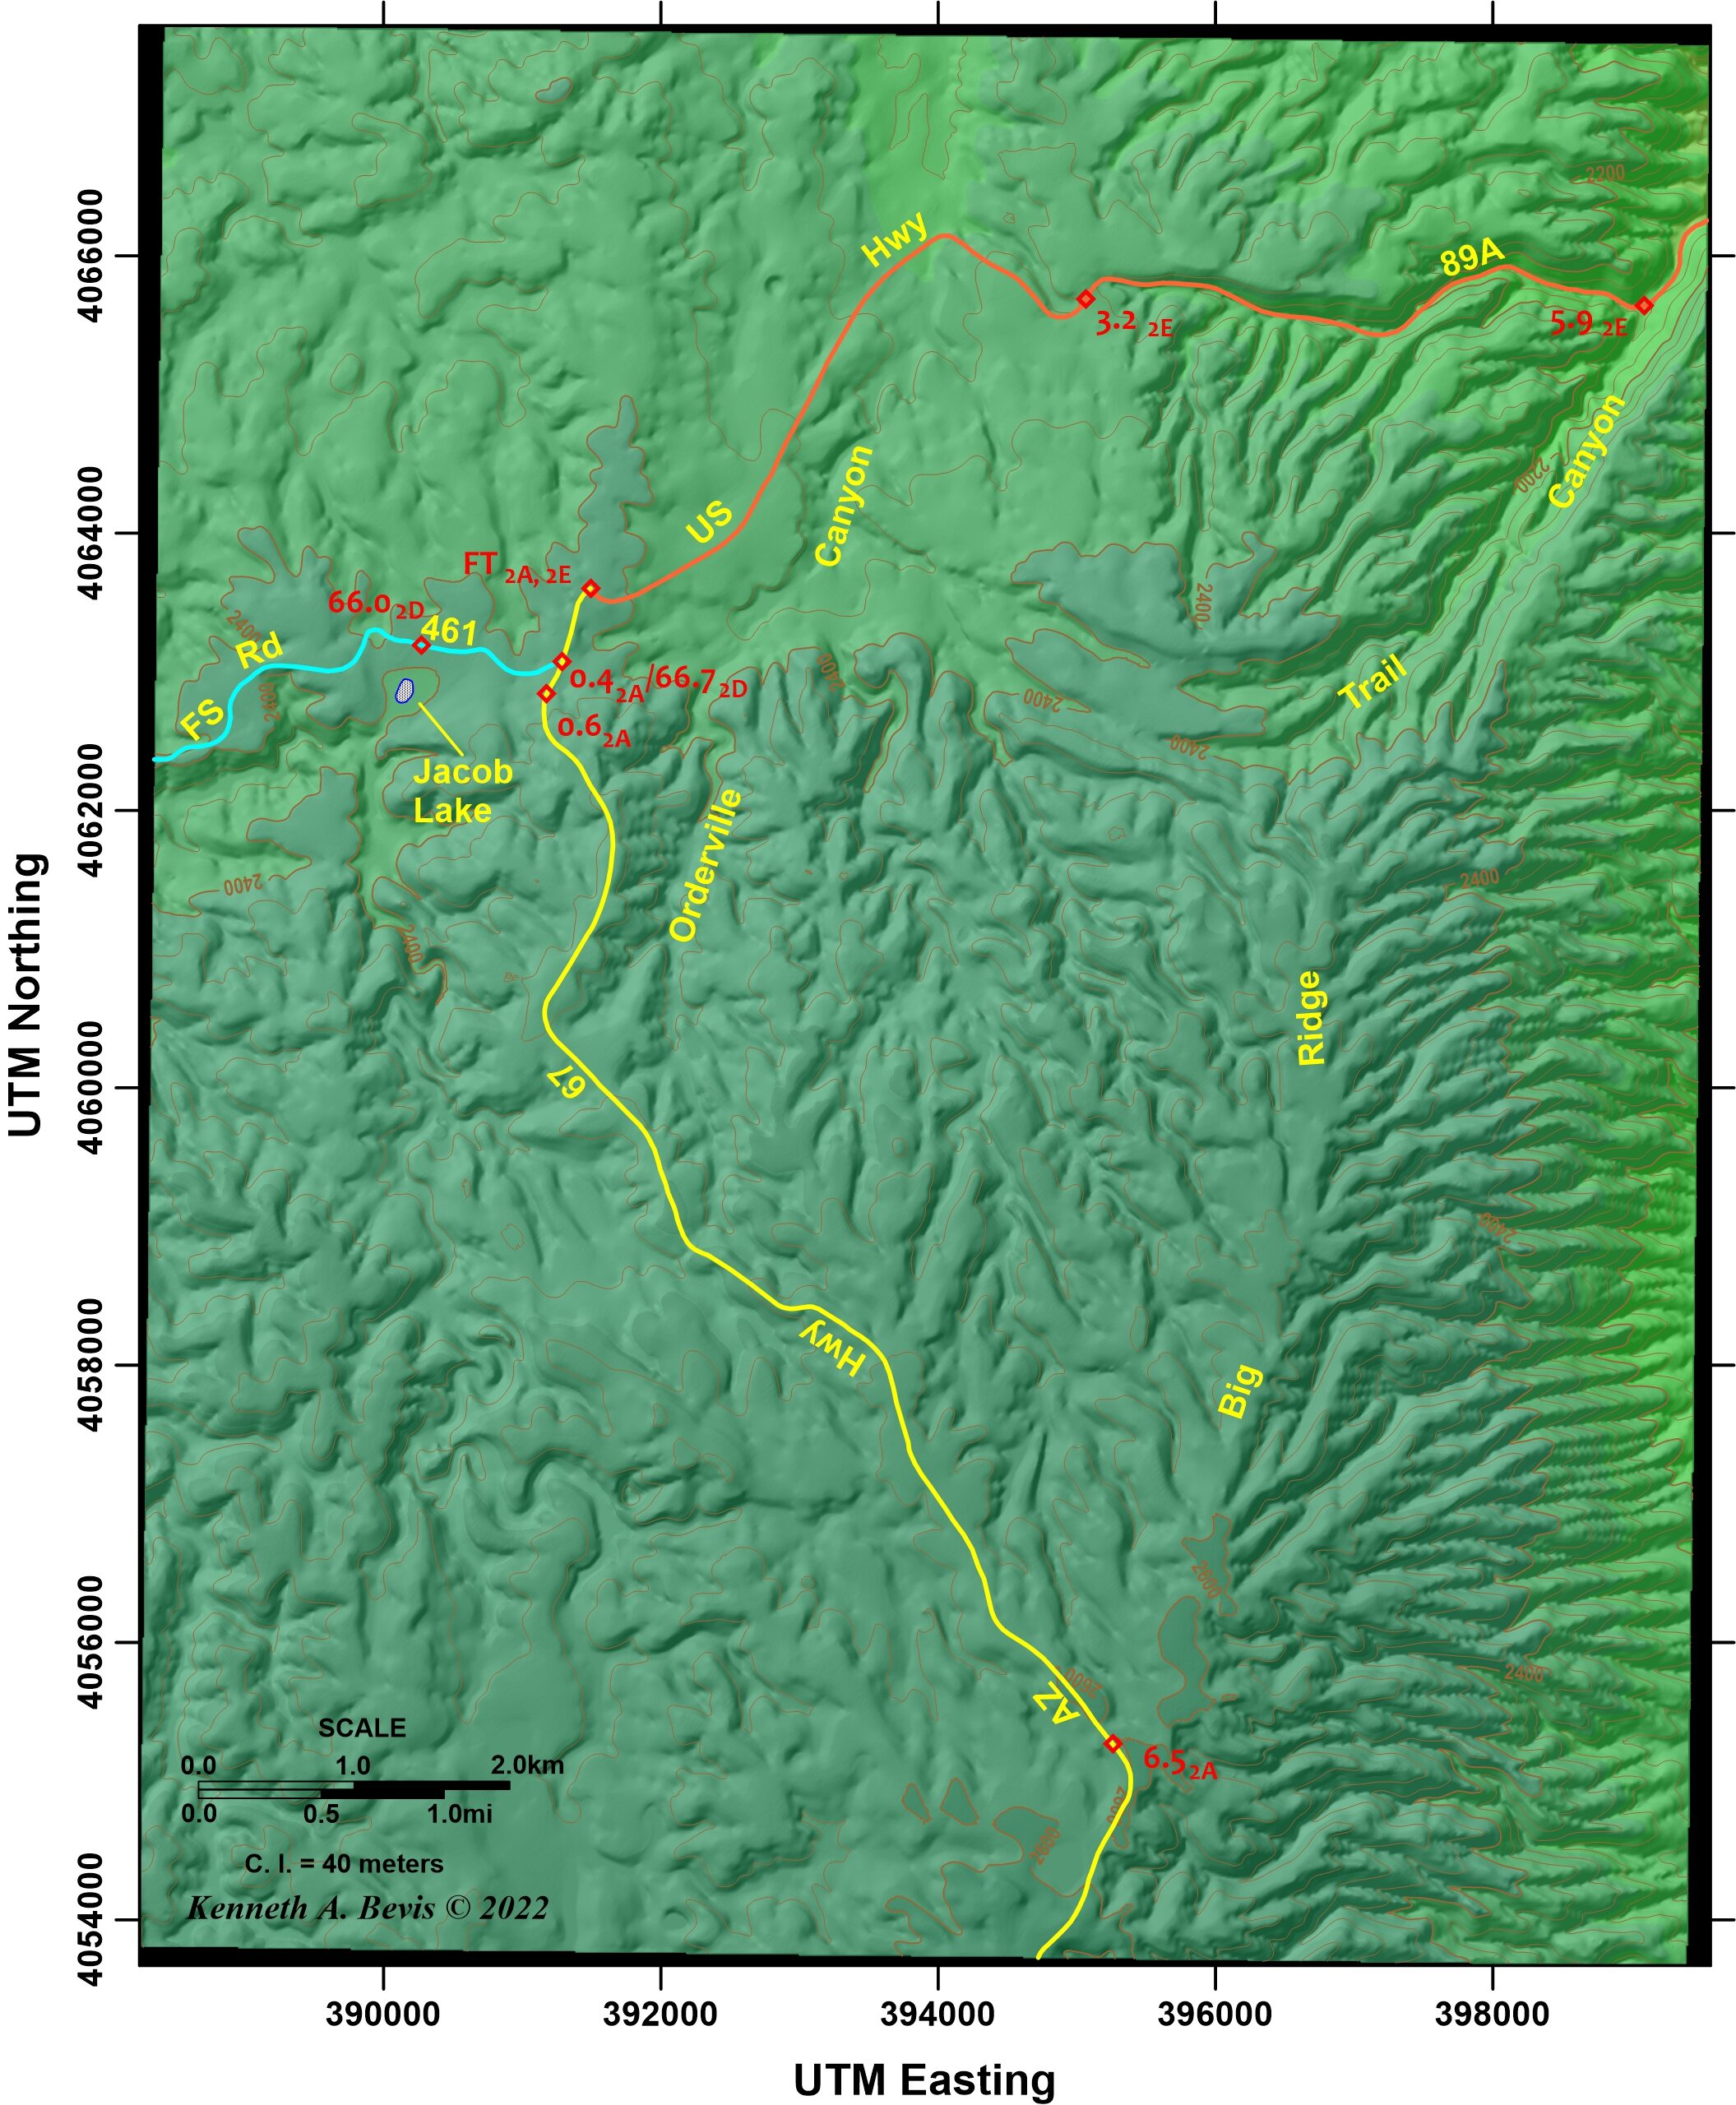 Color shaded-relief map of the Jacob Lake, AZ 7.5-minute quadrangle showing segments of Field Trip 2A, 2D, and 2E.